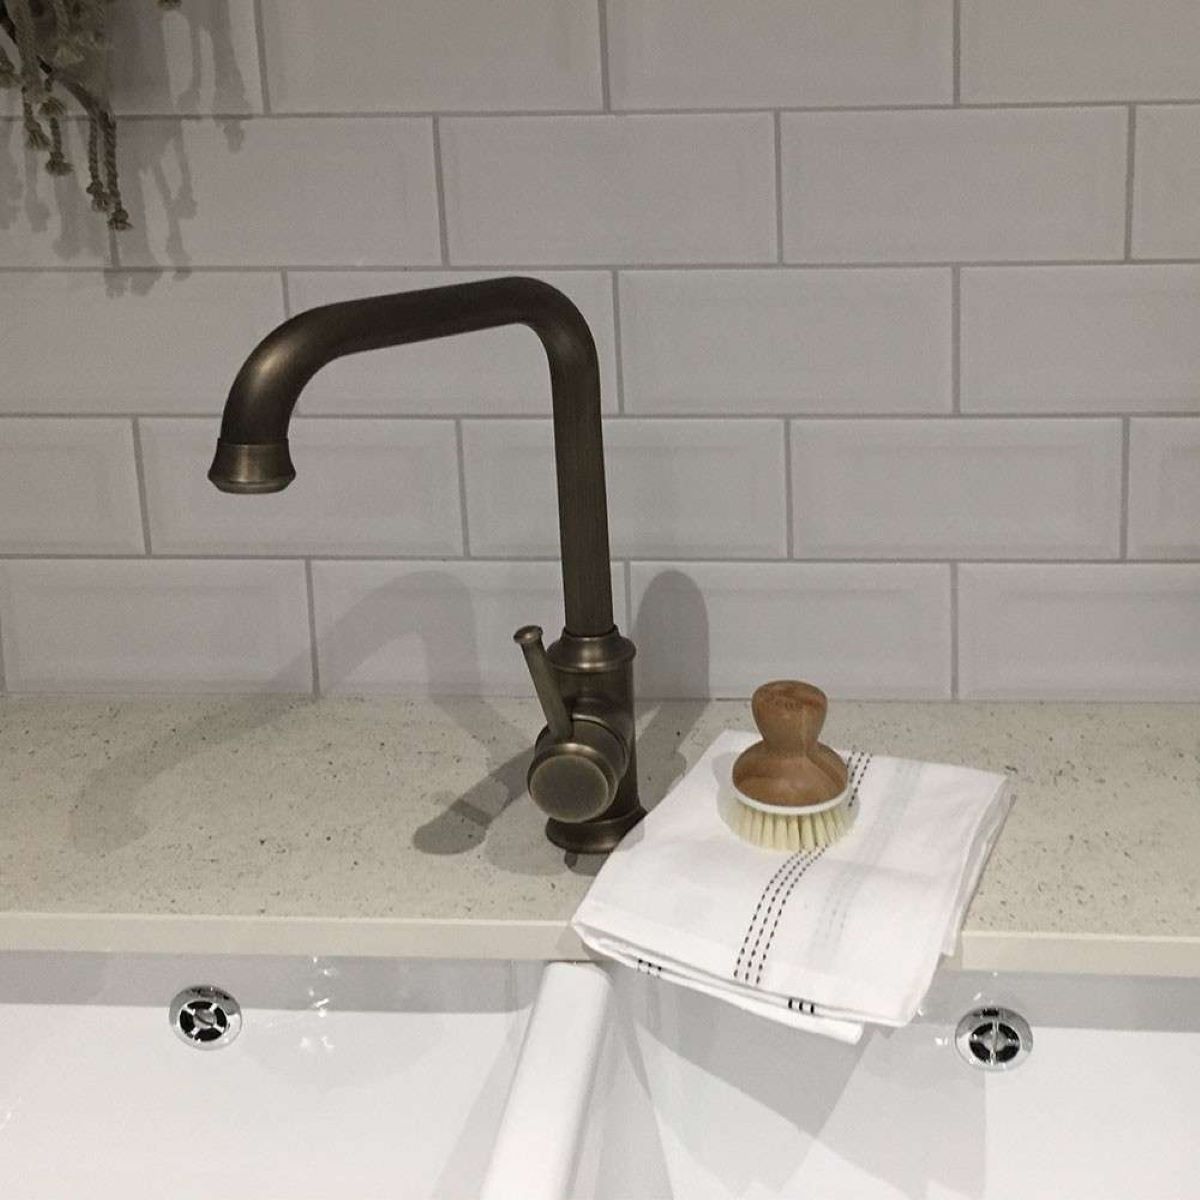 How To Regrout Countertops